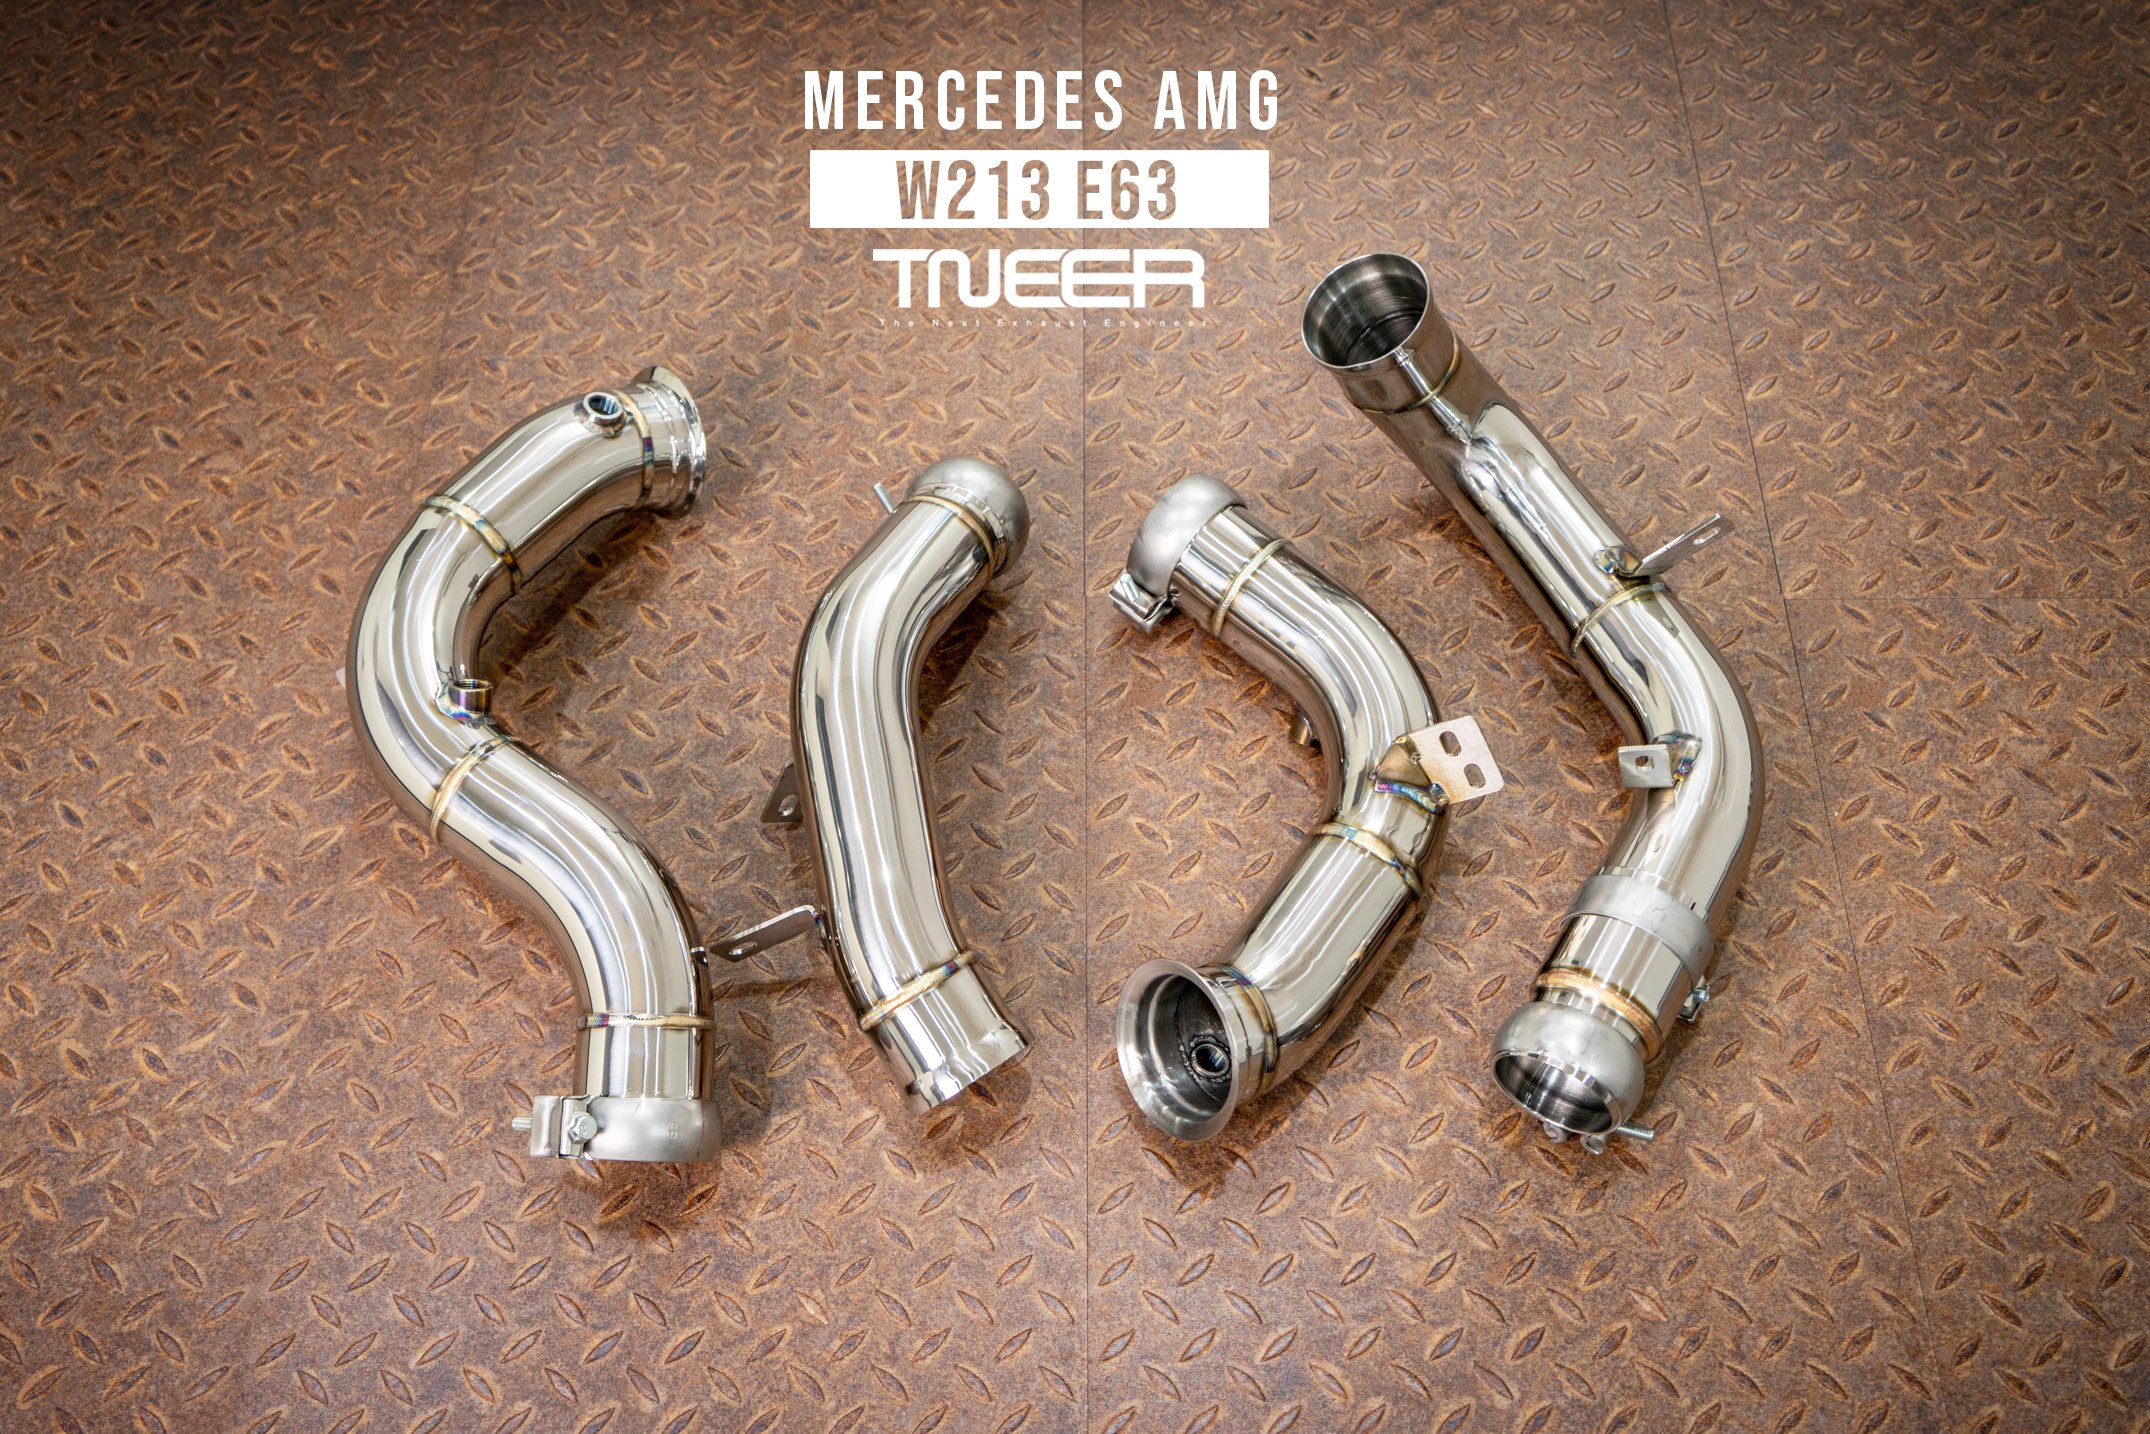 Mercedes-AMG W213 E63 TNEER Performance Exhaust System